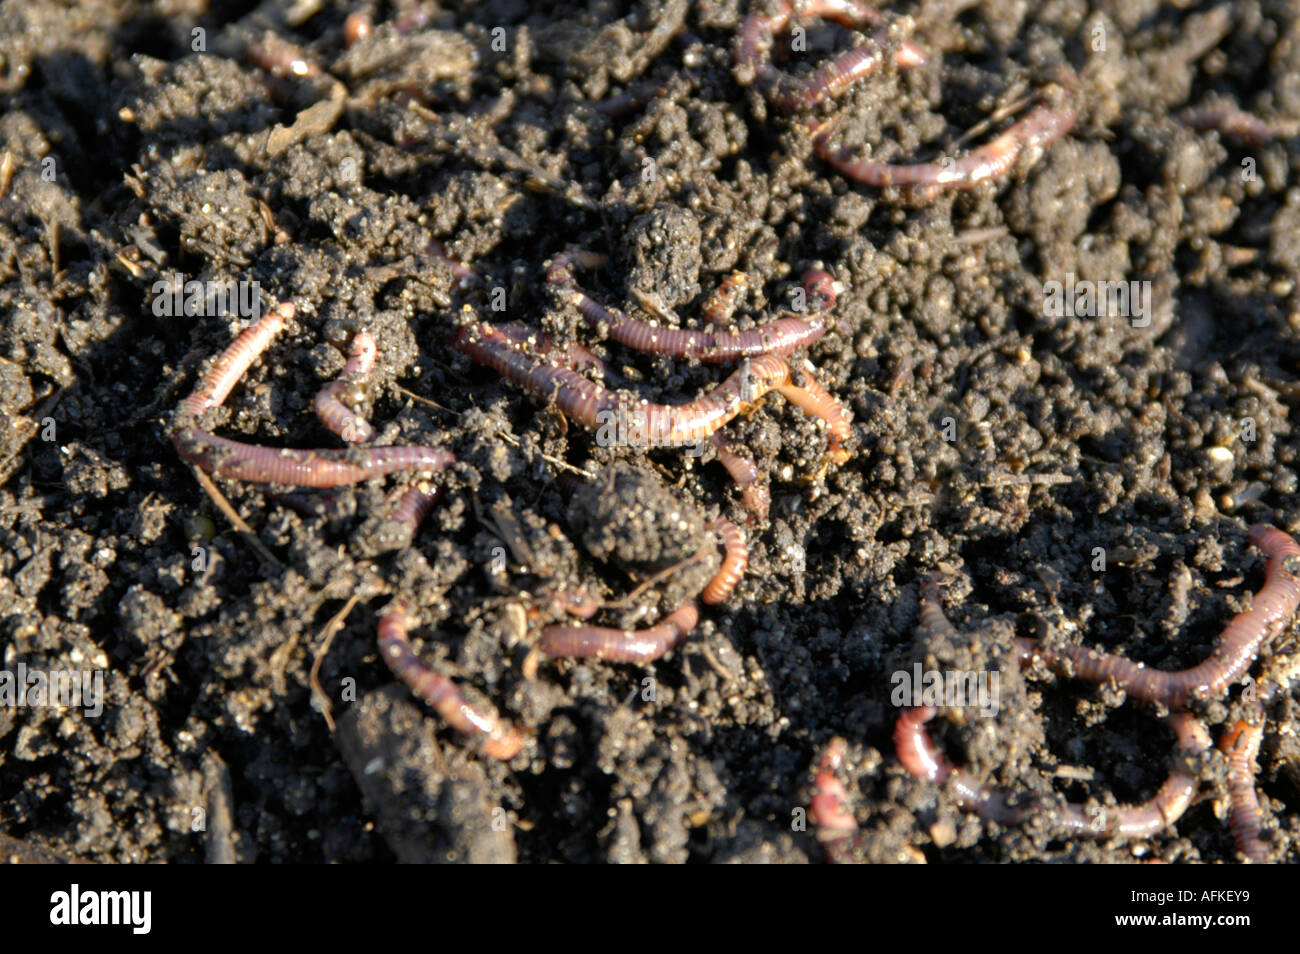 Tiger Worms In Garden Compost Stock Photo 7982648 Alamy